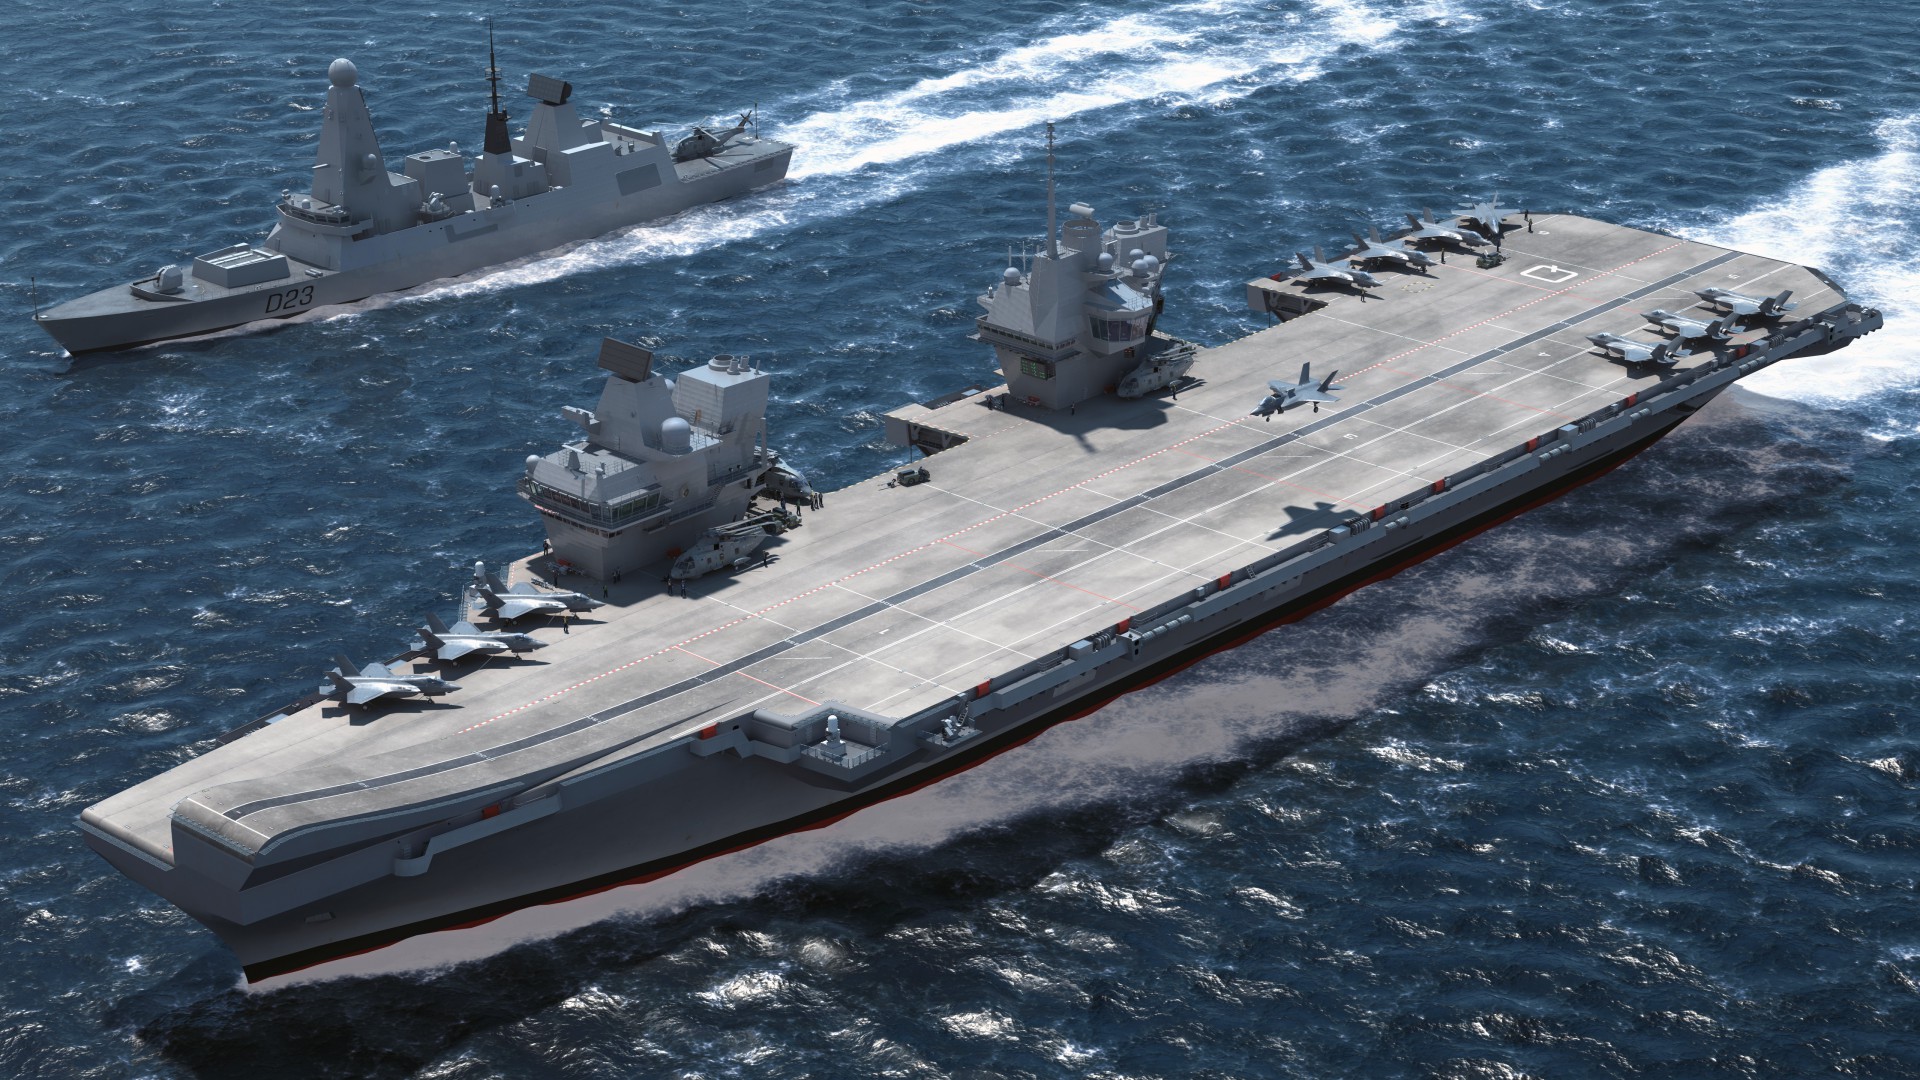 HMS Queen Elizabeth, lead ship, aircraft carrier, Royal Navy, English Armed Forces (horizontal)